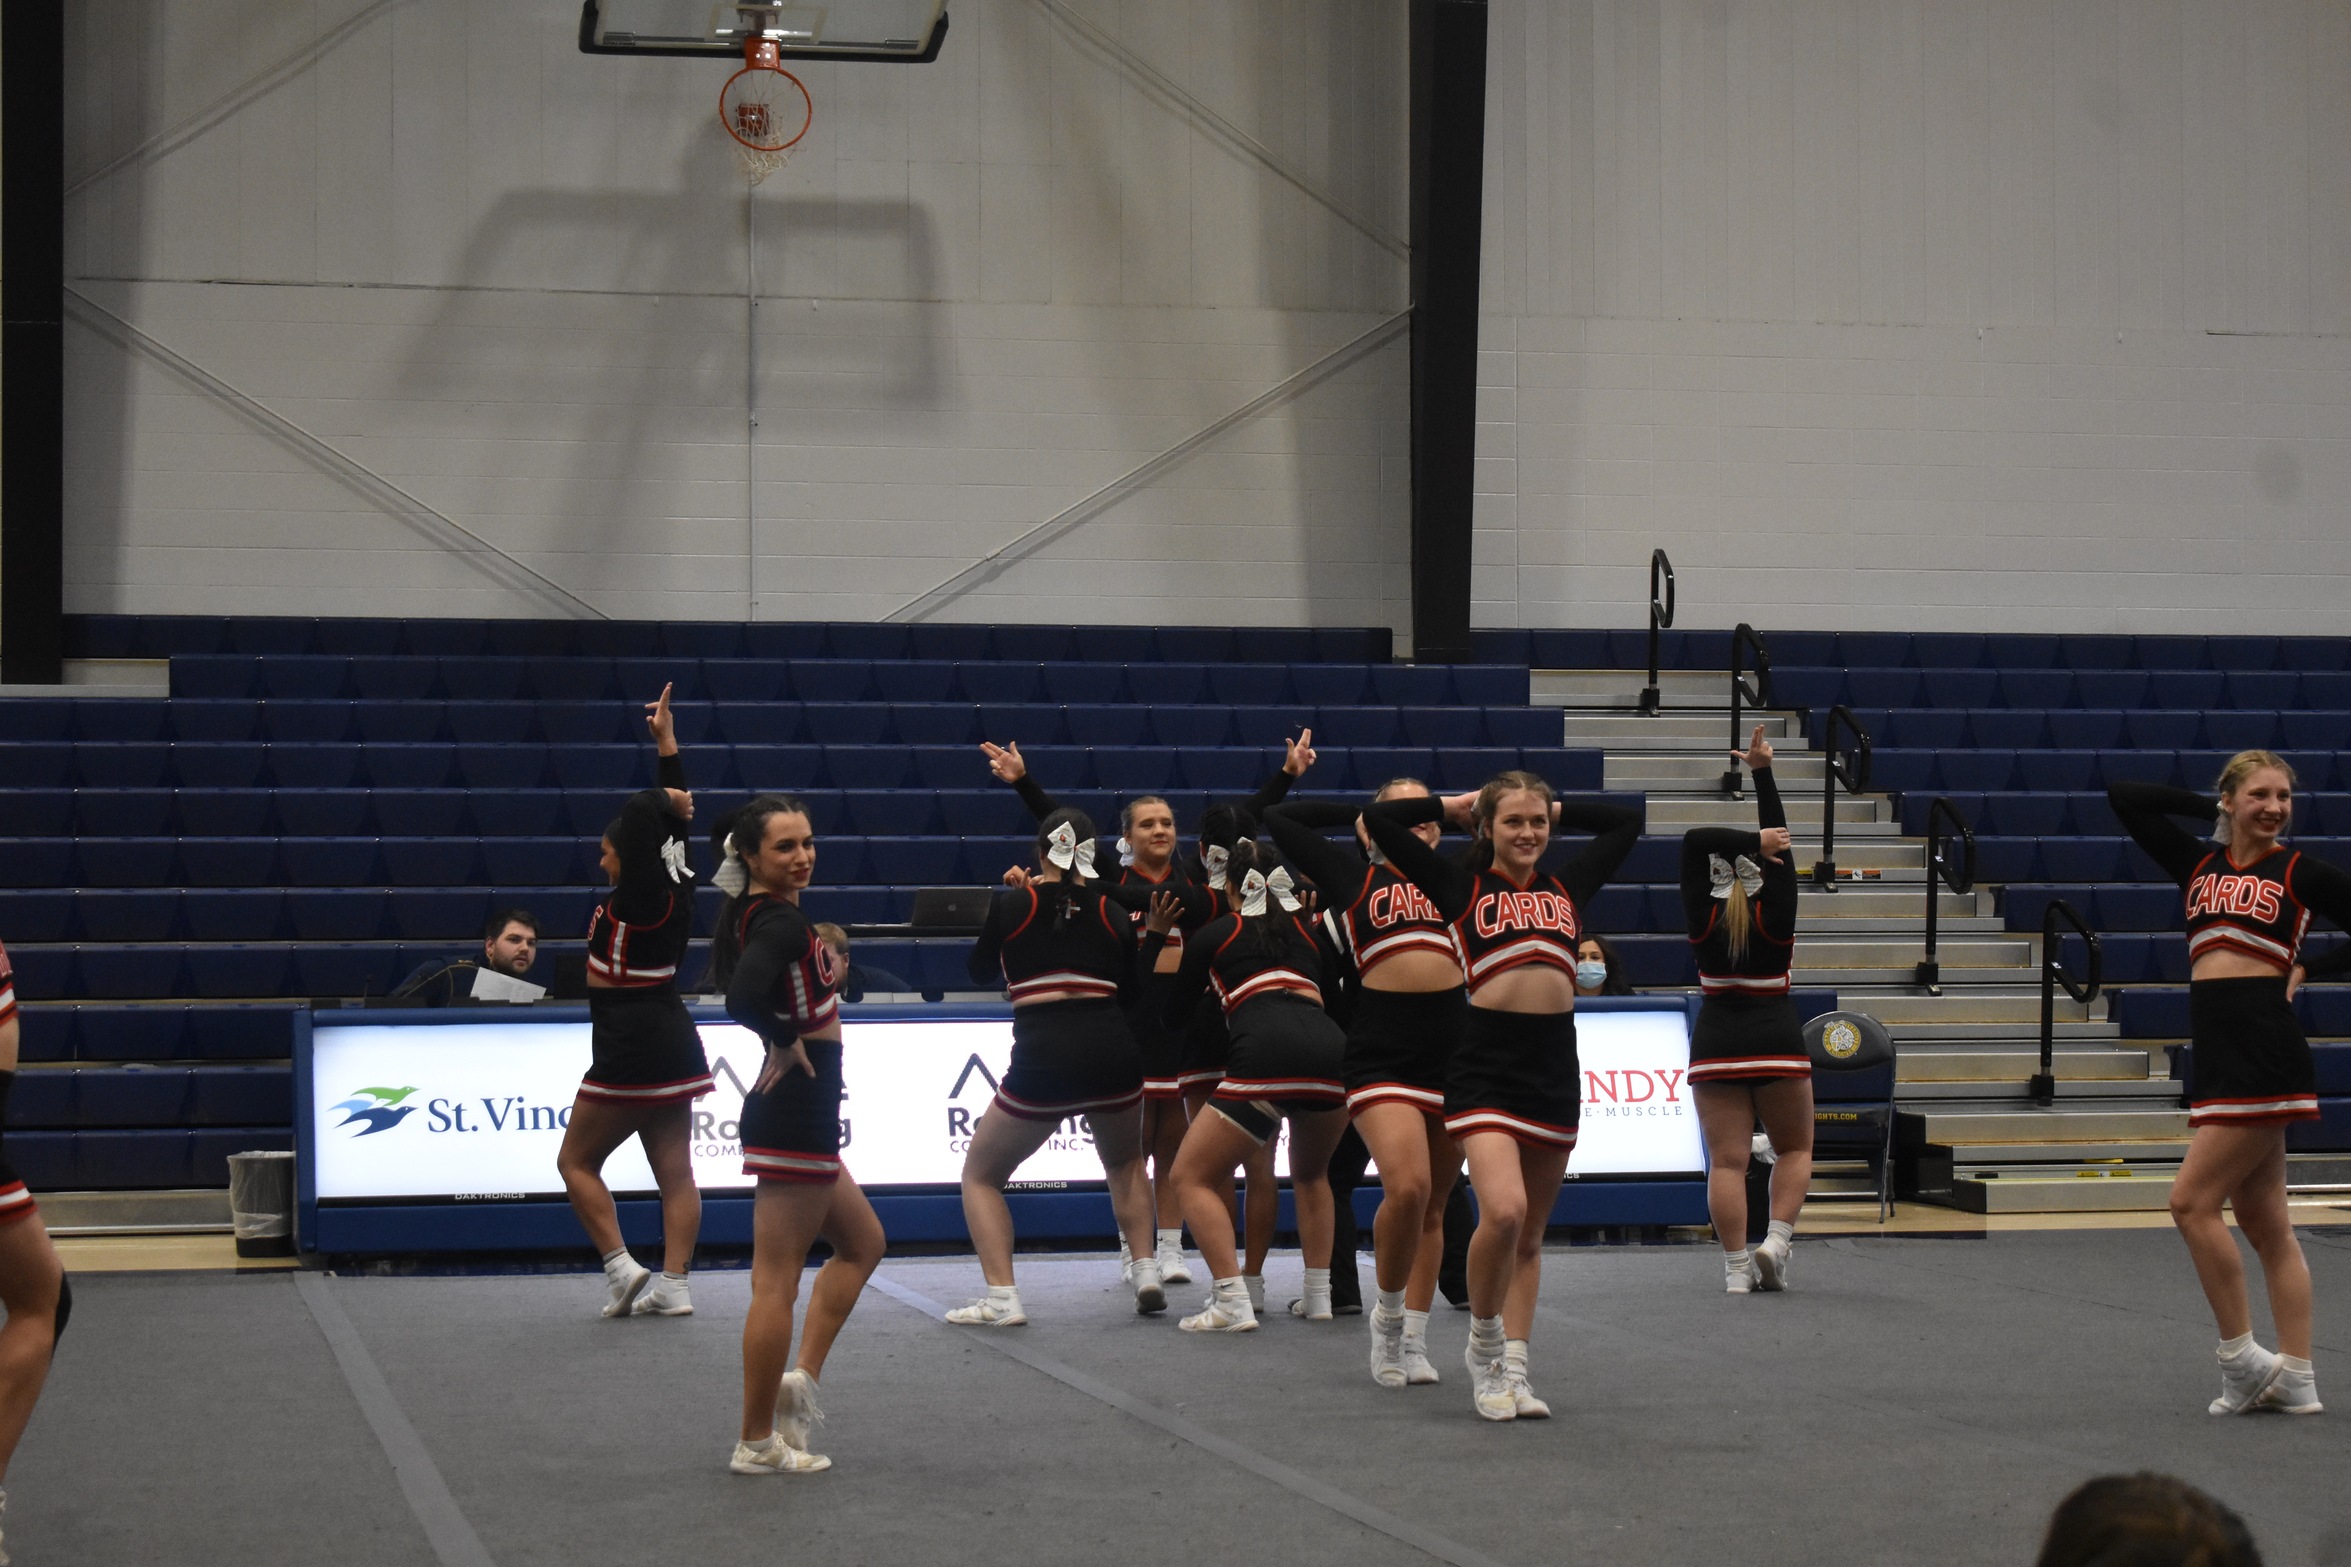 Cheer takes second at Marian Invite